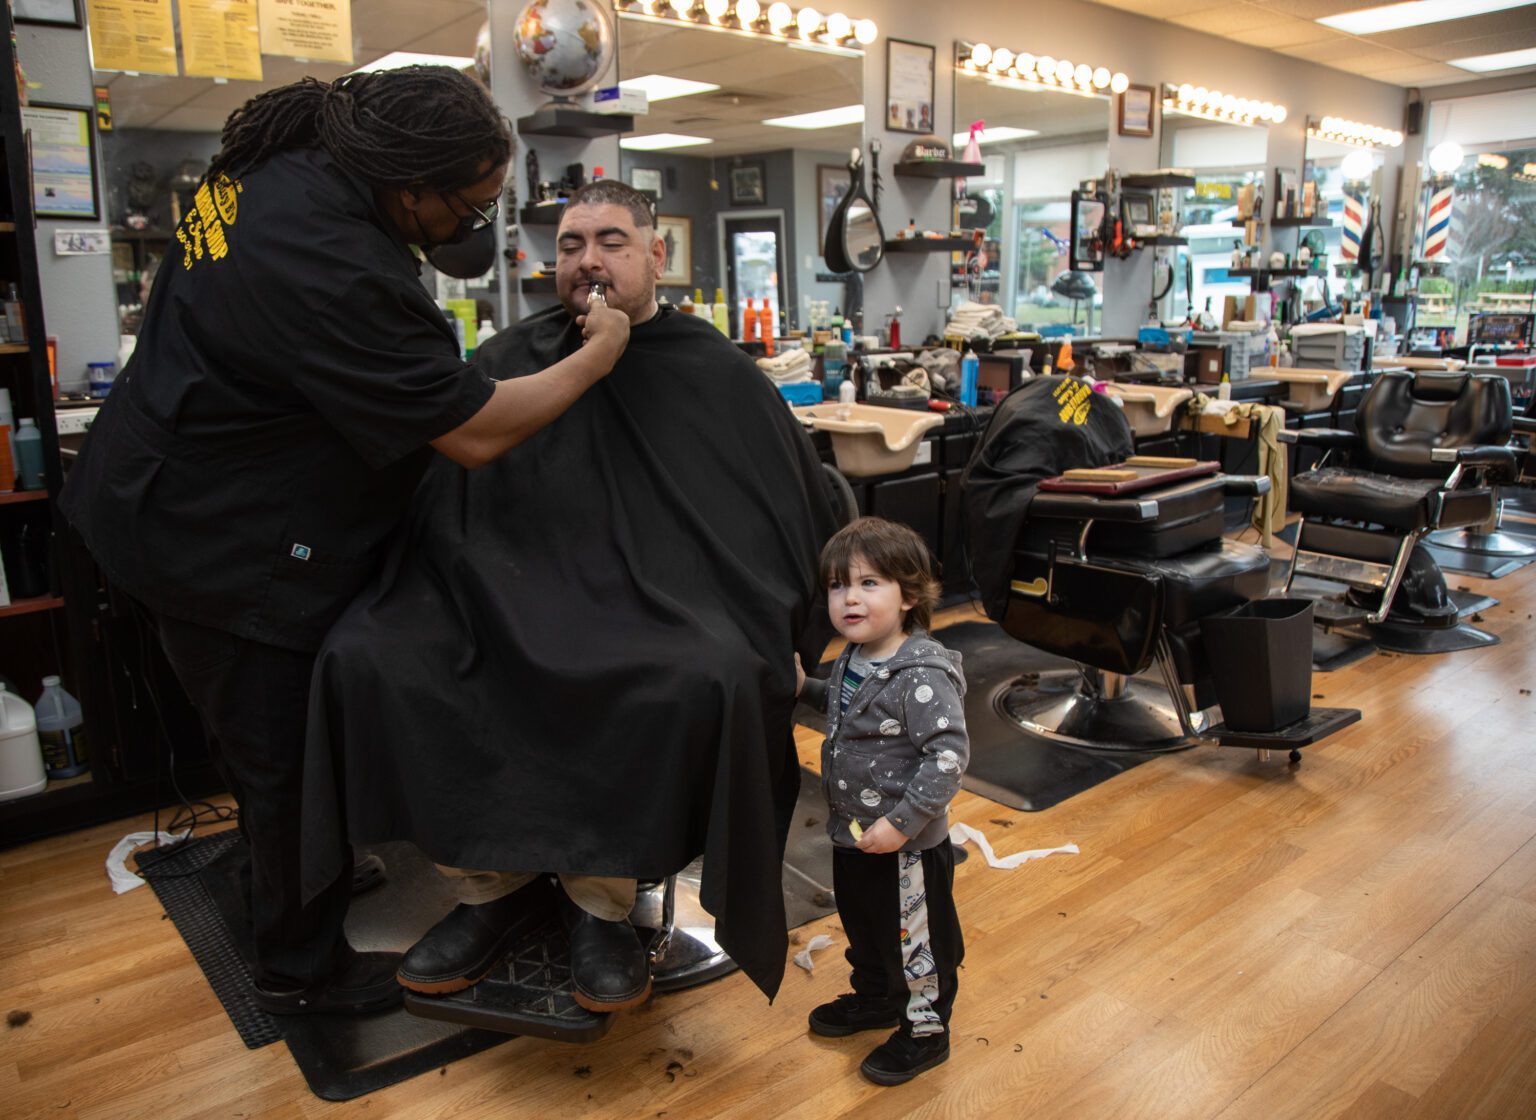 Bernard Franklin trims Fernando Martinez's mustache as his son, Niko, holding onto the barbershop's barber cape that's draped over his father.